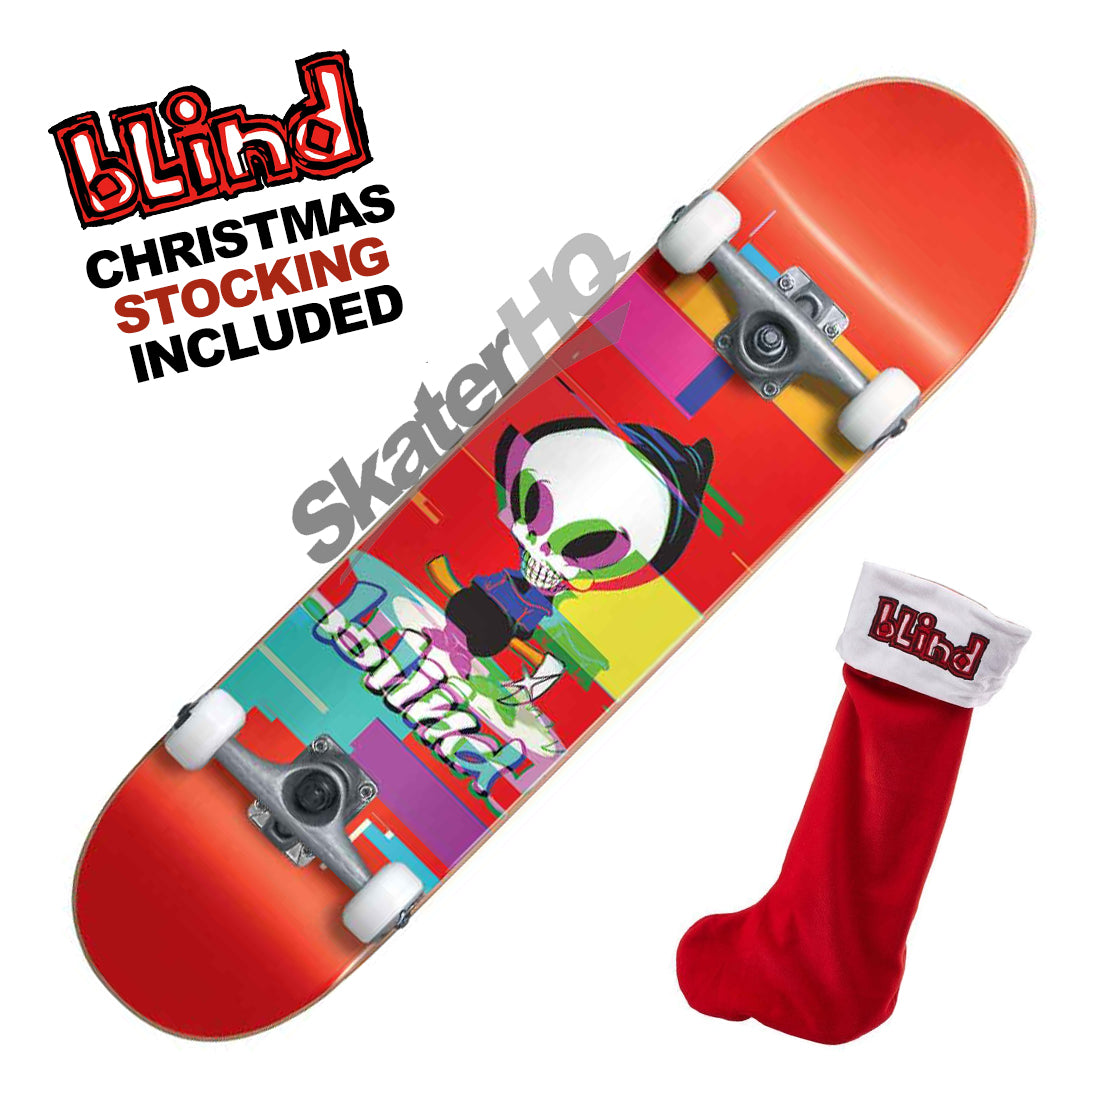 Blind Reaper Glitch 7.75 Complete w/ Stocking - Bright Red Skateboard Completes Modern Street